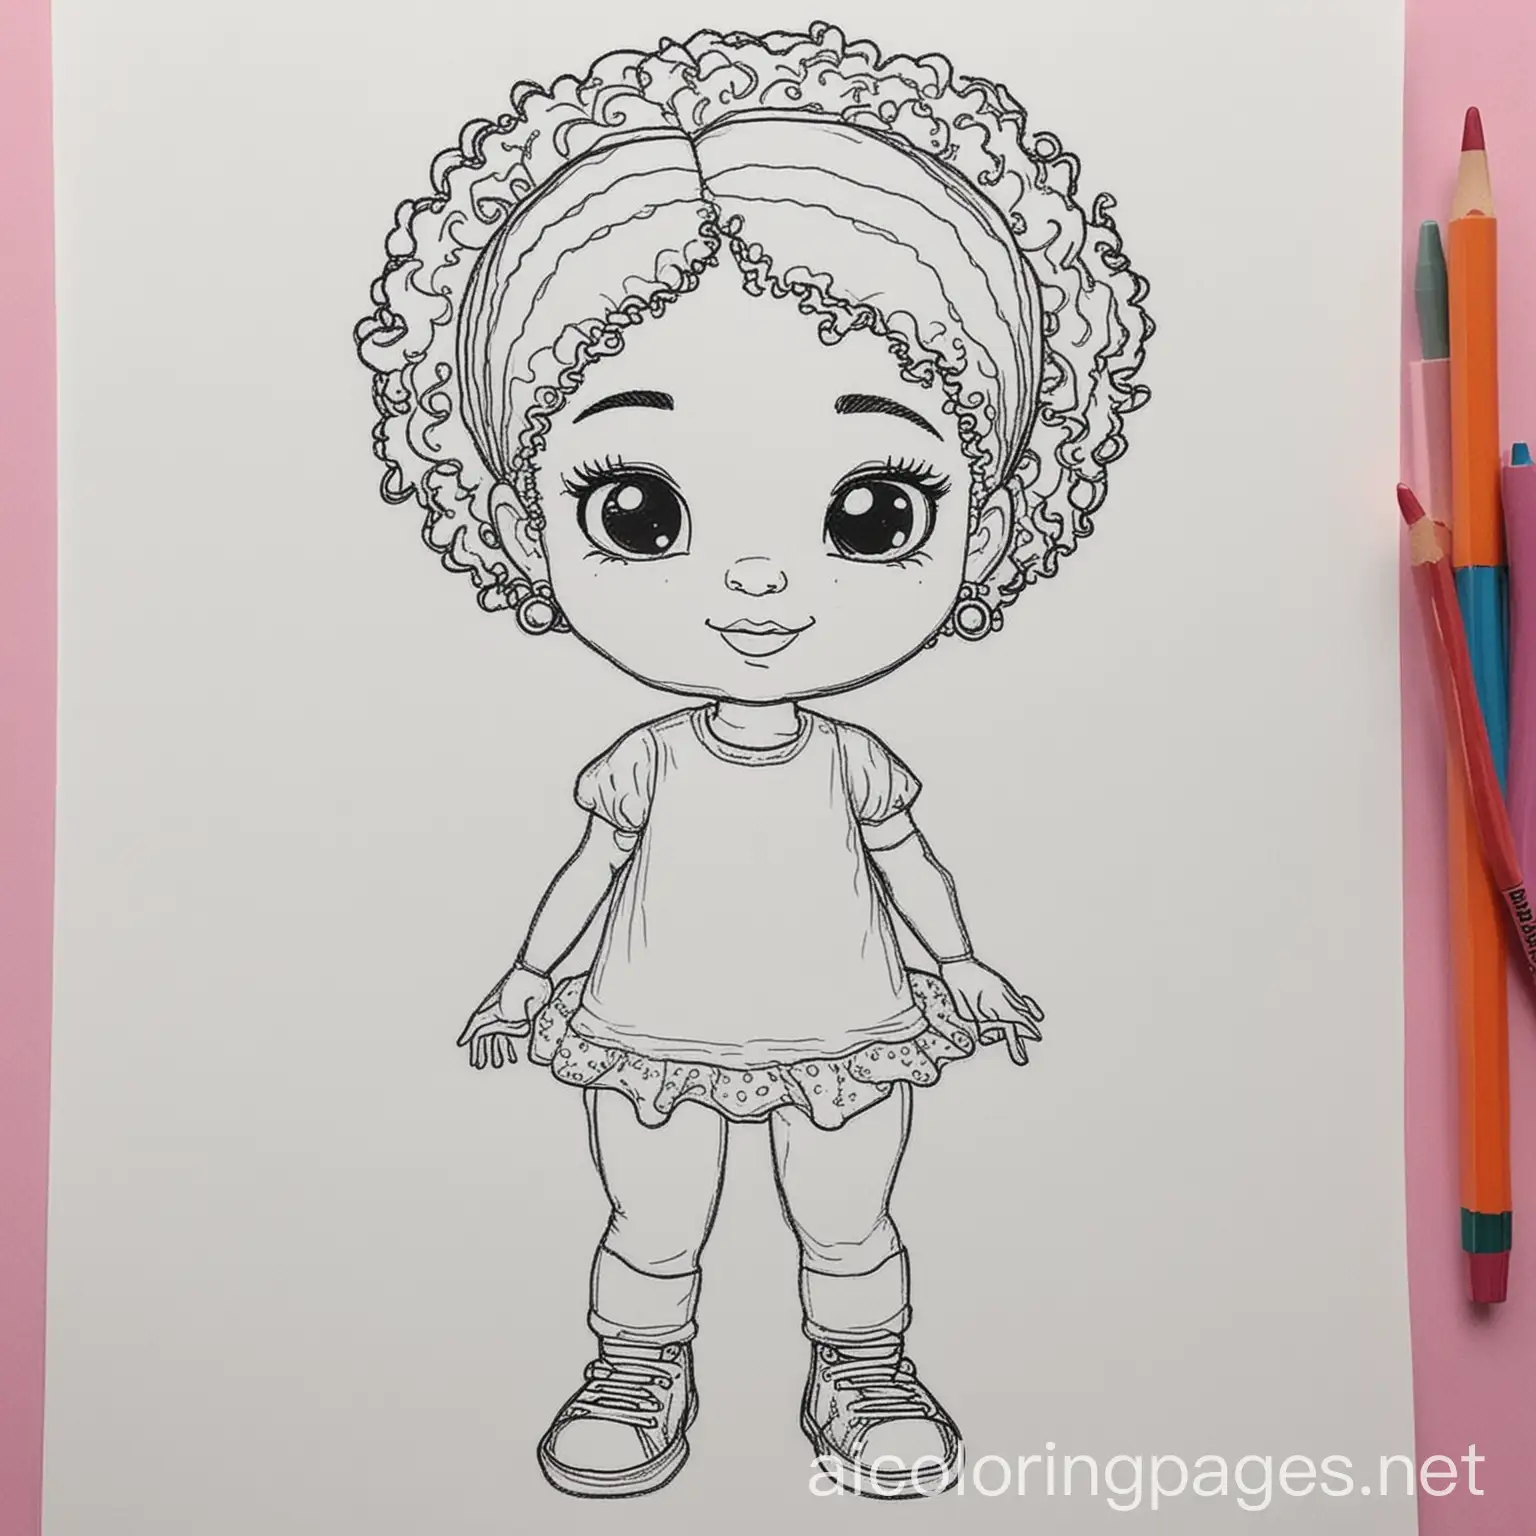 Simple-Black-and-White-Coloring-Page-for-Little-Girls